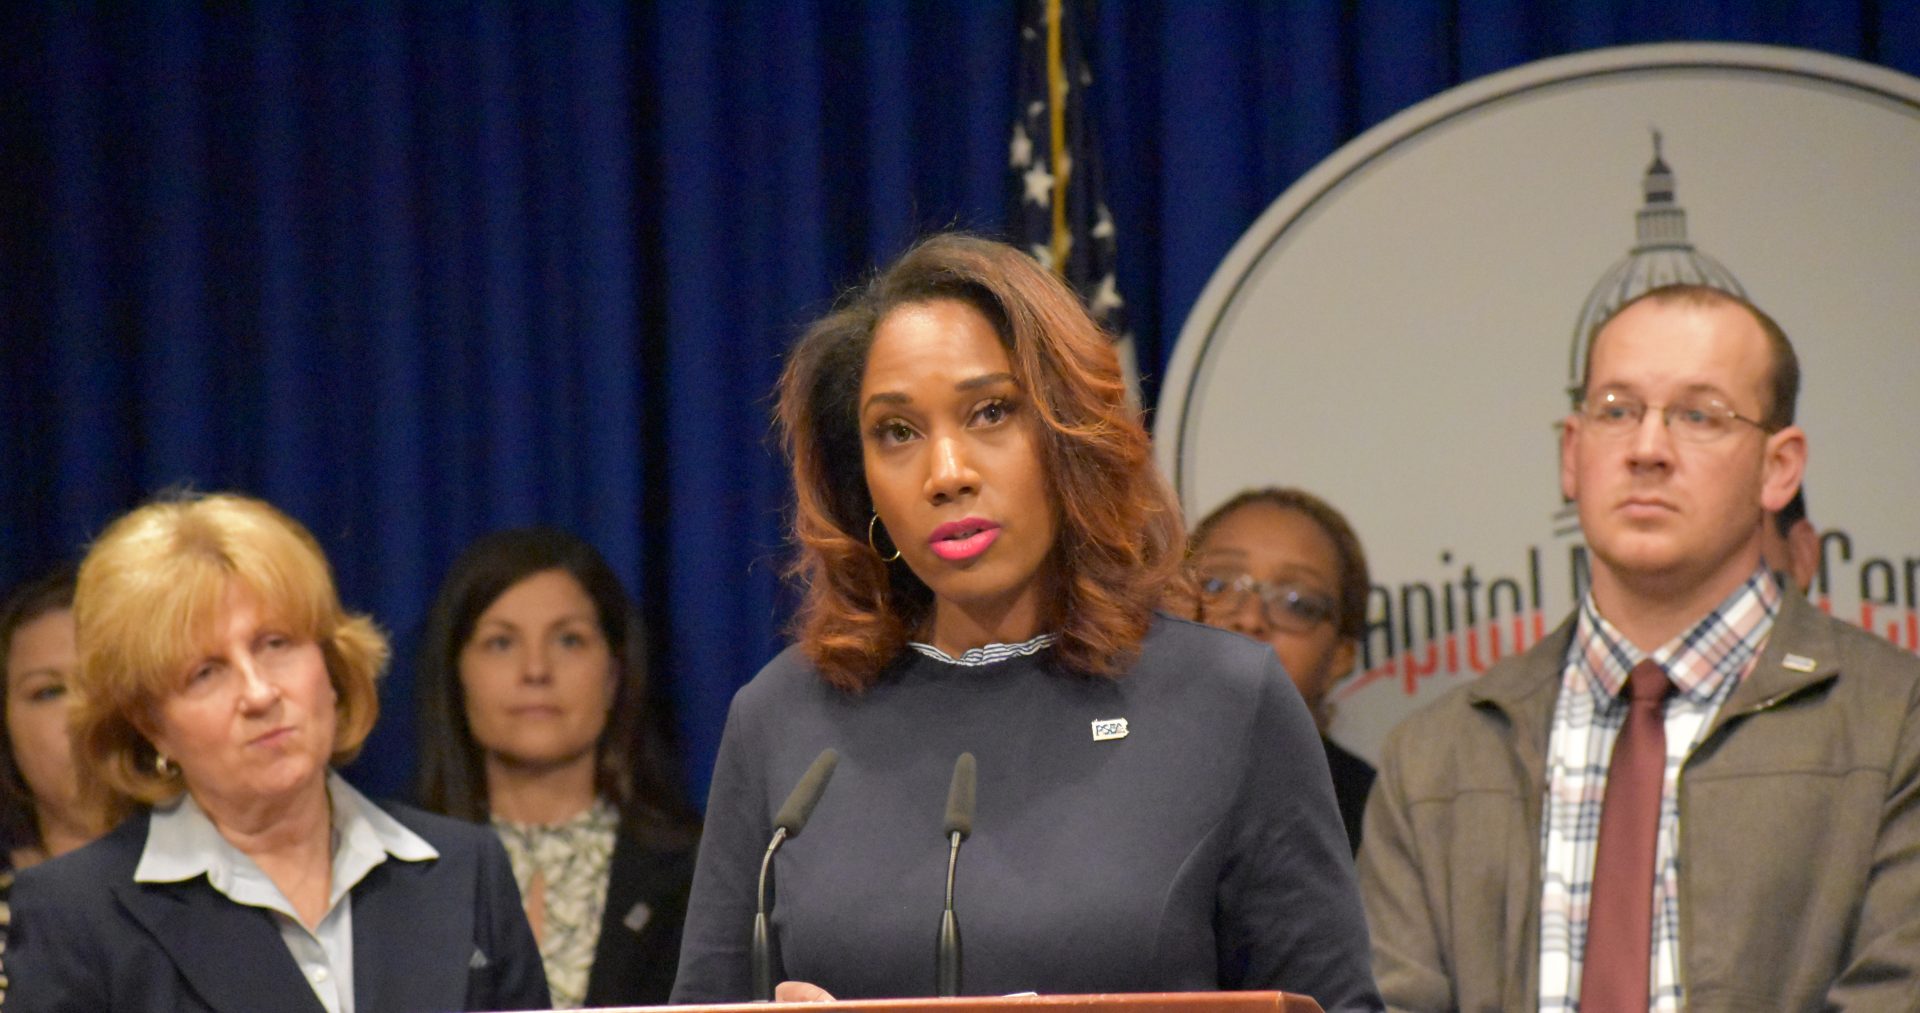 Bridgette May, a certified school nurse in the Erie City School District, speaks during a news conference at the state Capitol on March 26, 2019.